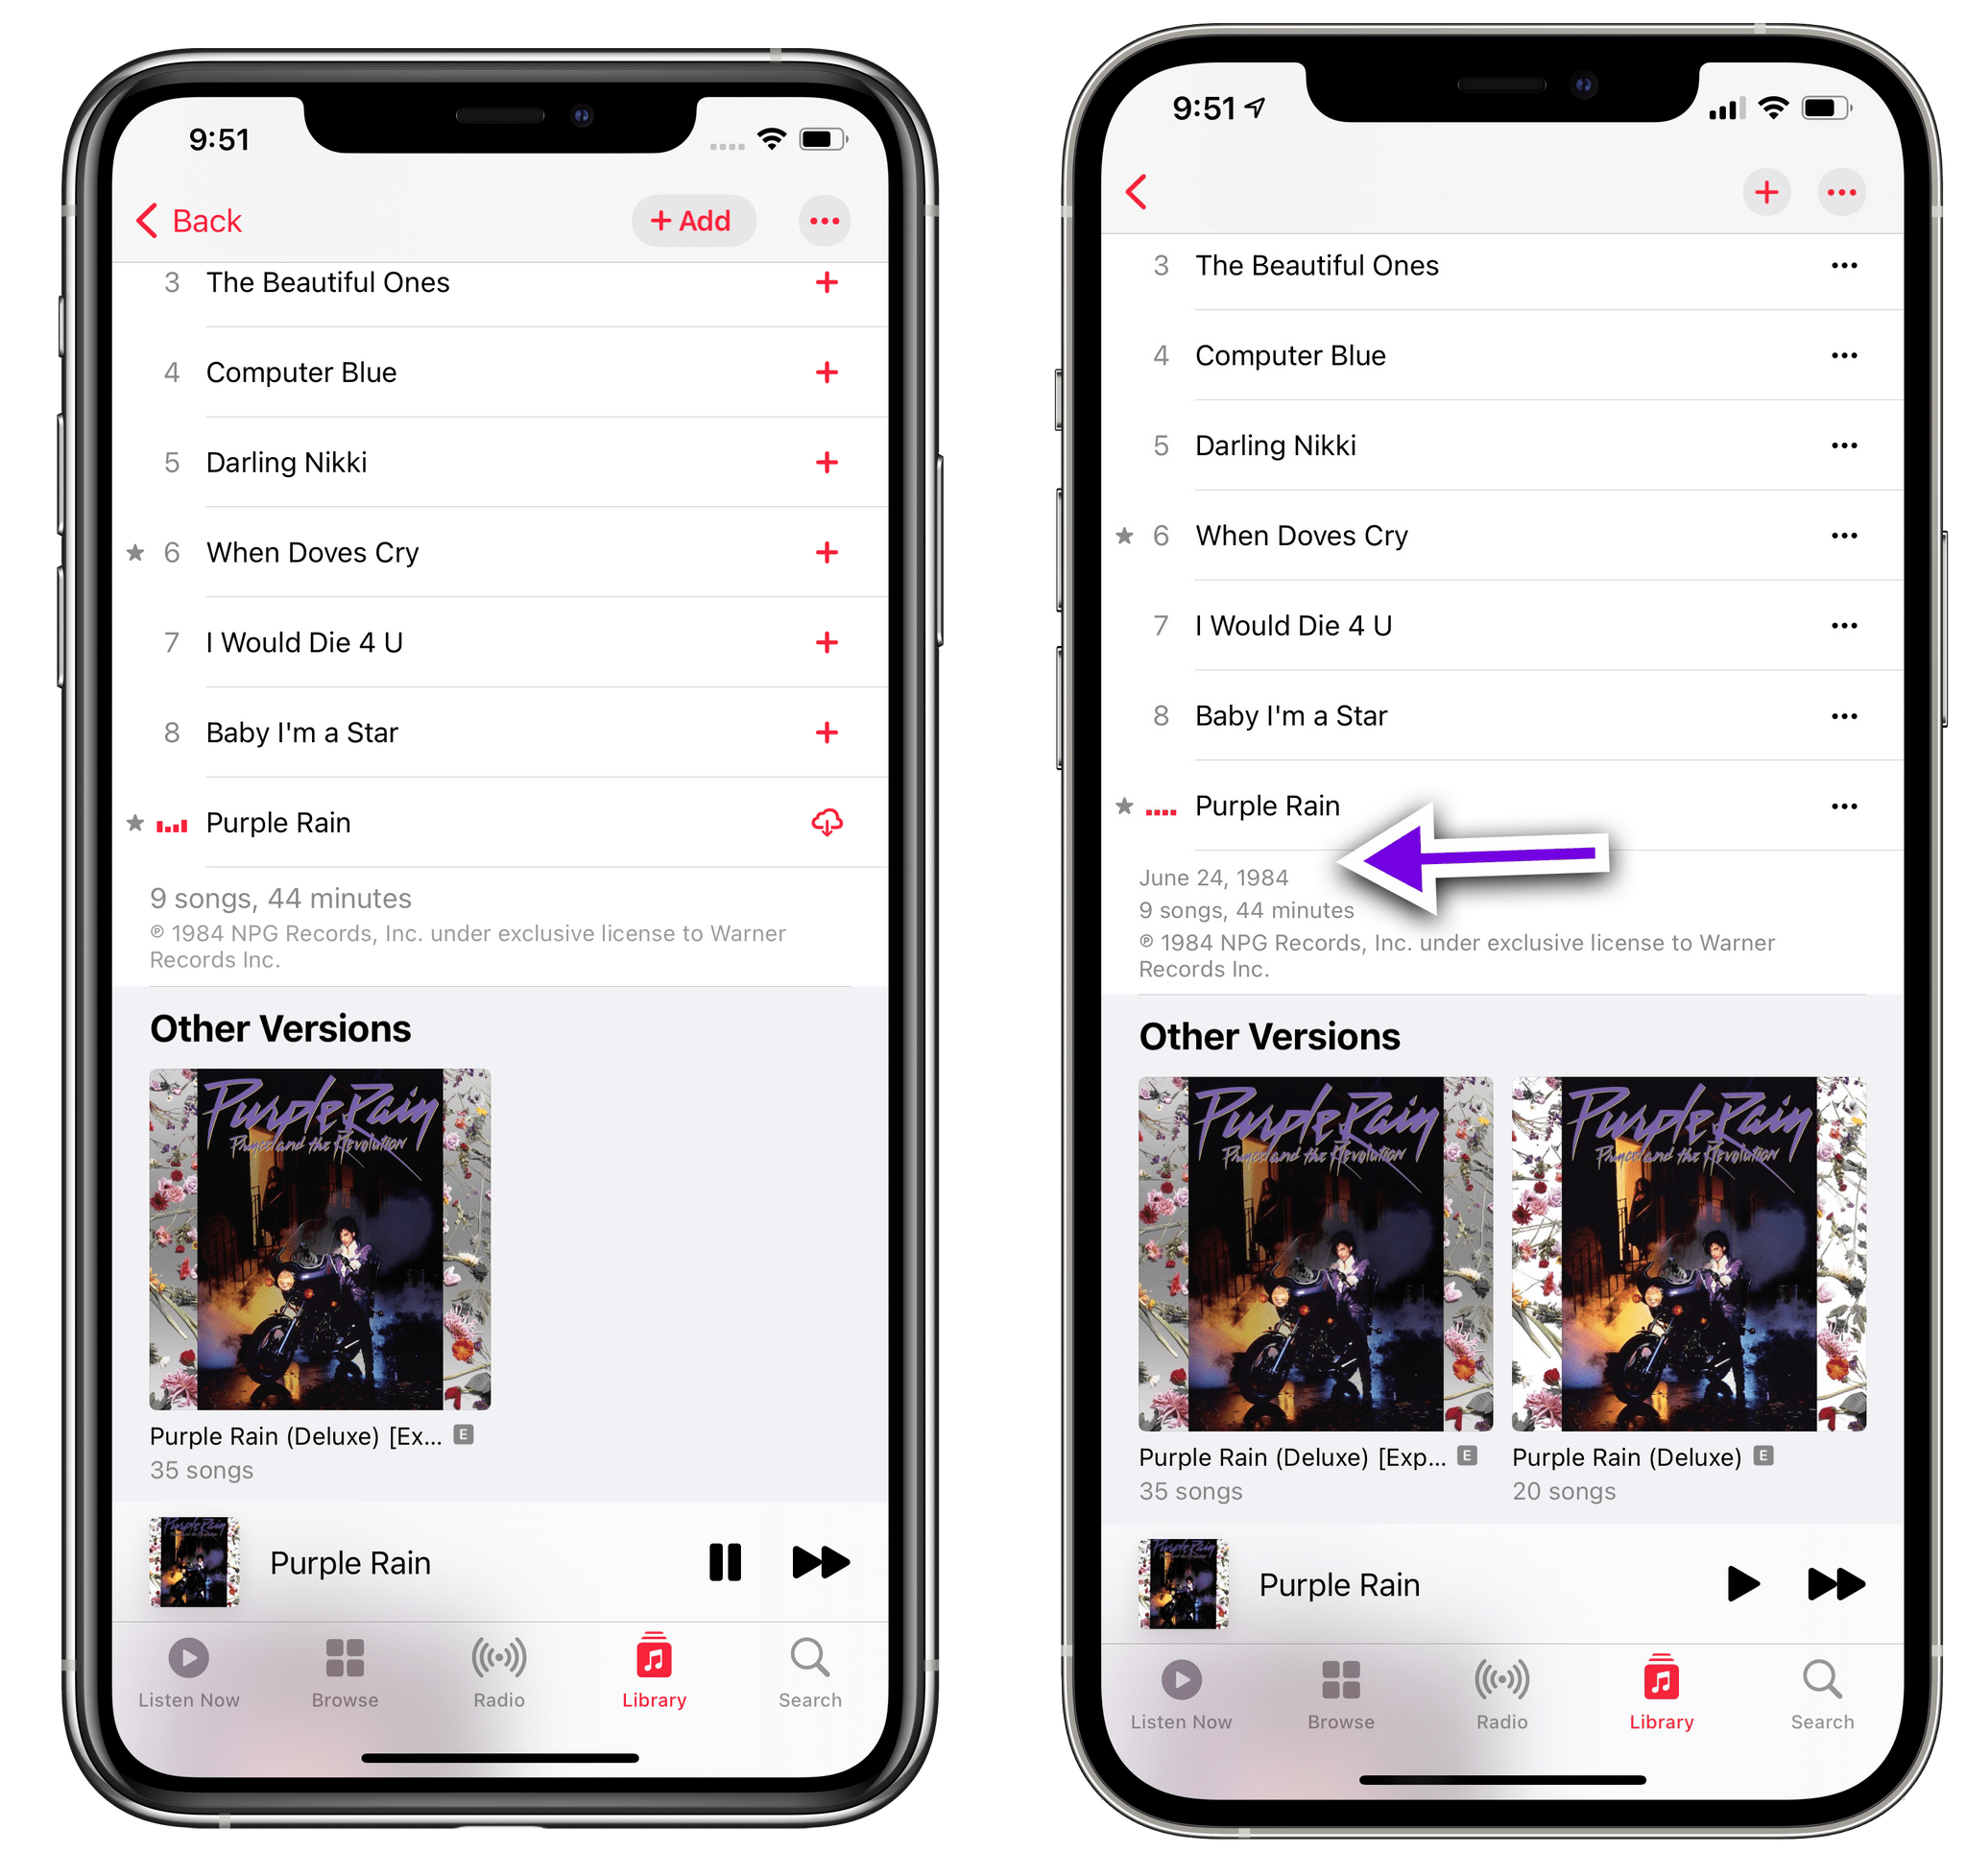 iOS 14.5 can display exact release dates for albums.